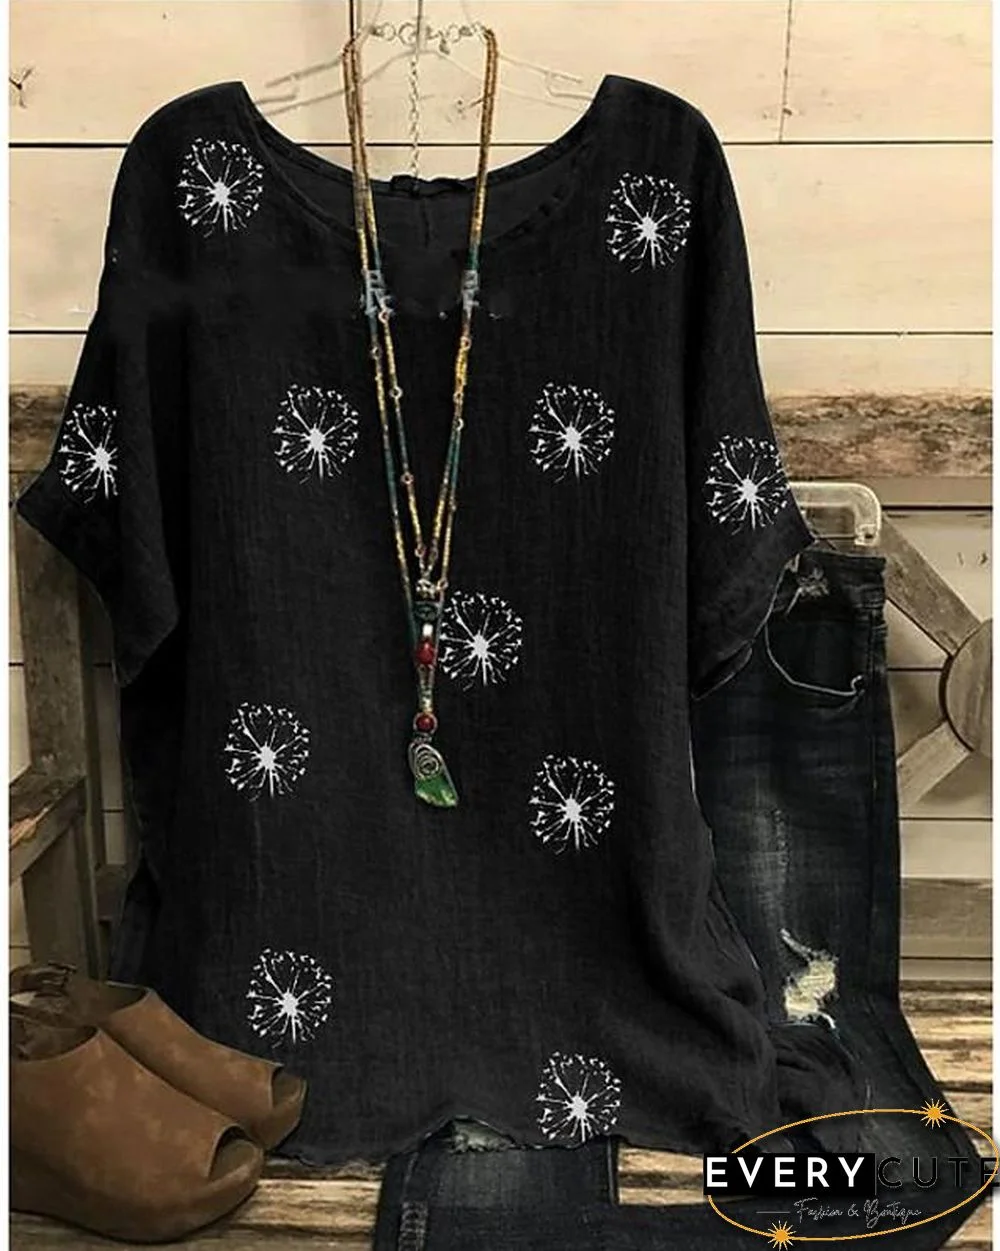 Women's Plus Size Blouse Shirt Floral Holiday Flower Print Round Neck Tops Loose Boho Basic Top Black Wine Green / Sunflower-824